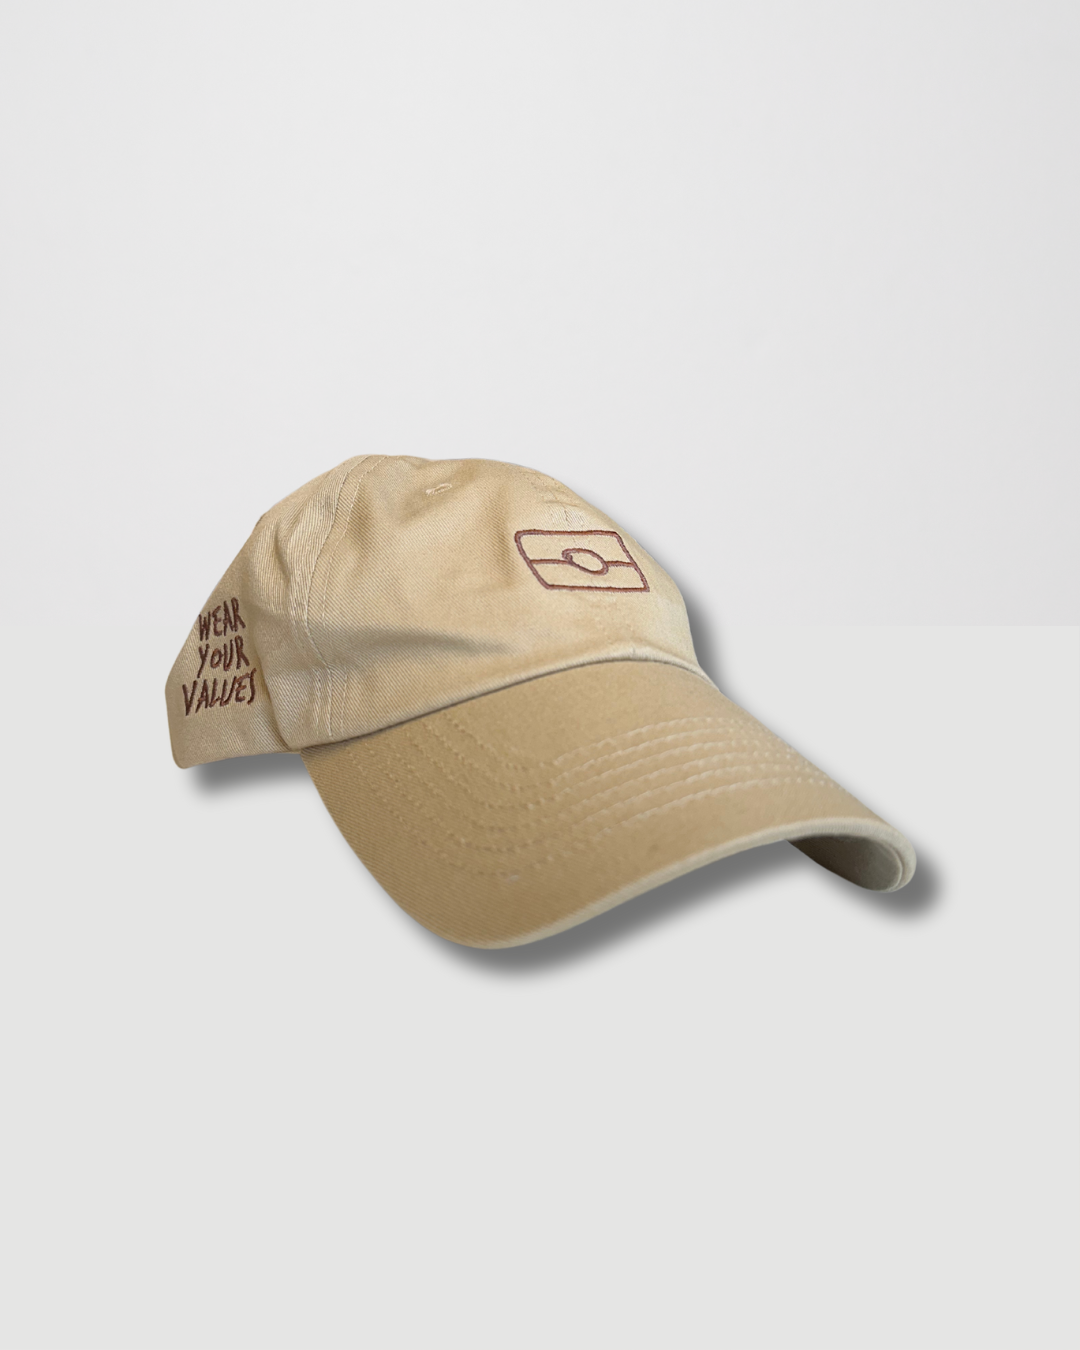 Clothing The Gaps. The OG 2.0 Cap. Beige adjustable cap. With embroidered brown outline of aboriginal flag on front. 'Wear your values' text embroidered on side of cap in same brown colour. Clothing The Gaps embroidered on back in brown stitching. Adjustable clip strap on back with silver clip featuring Clothing The Gaps logo.